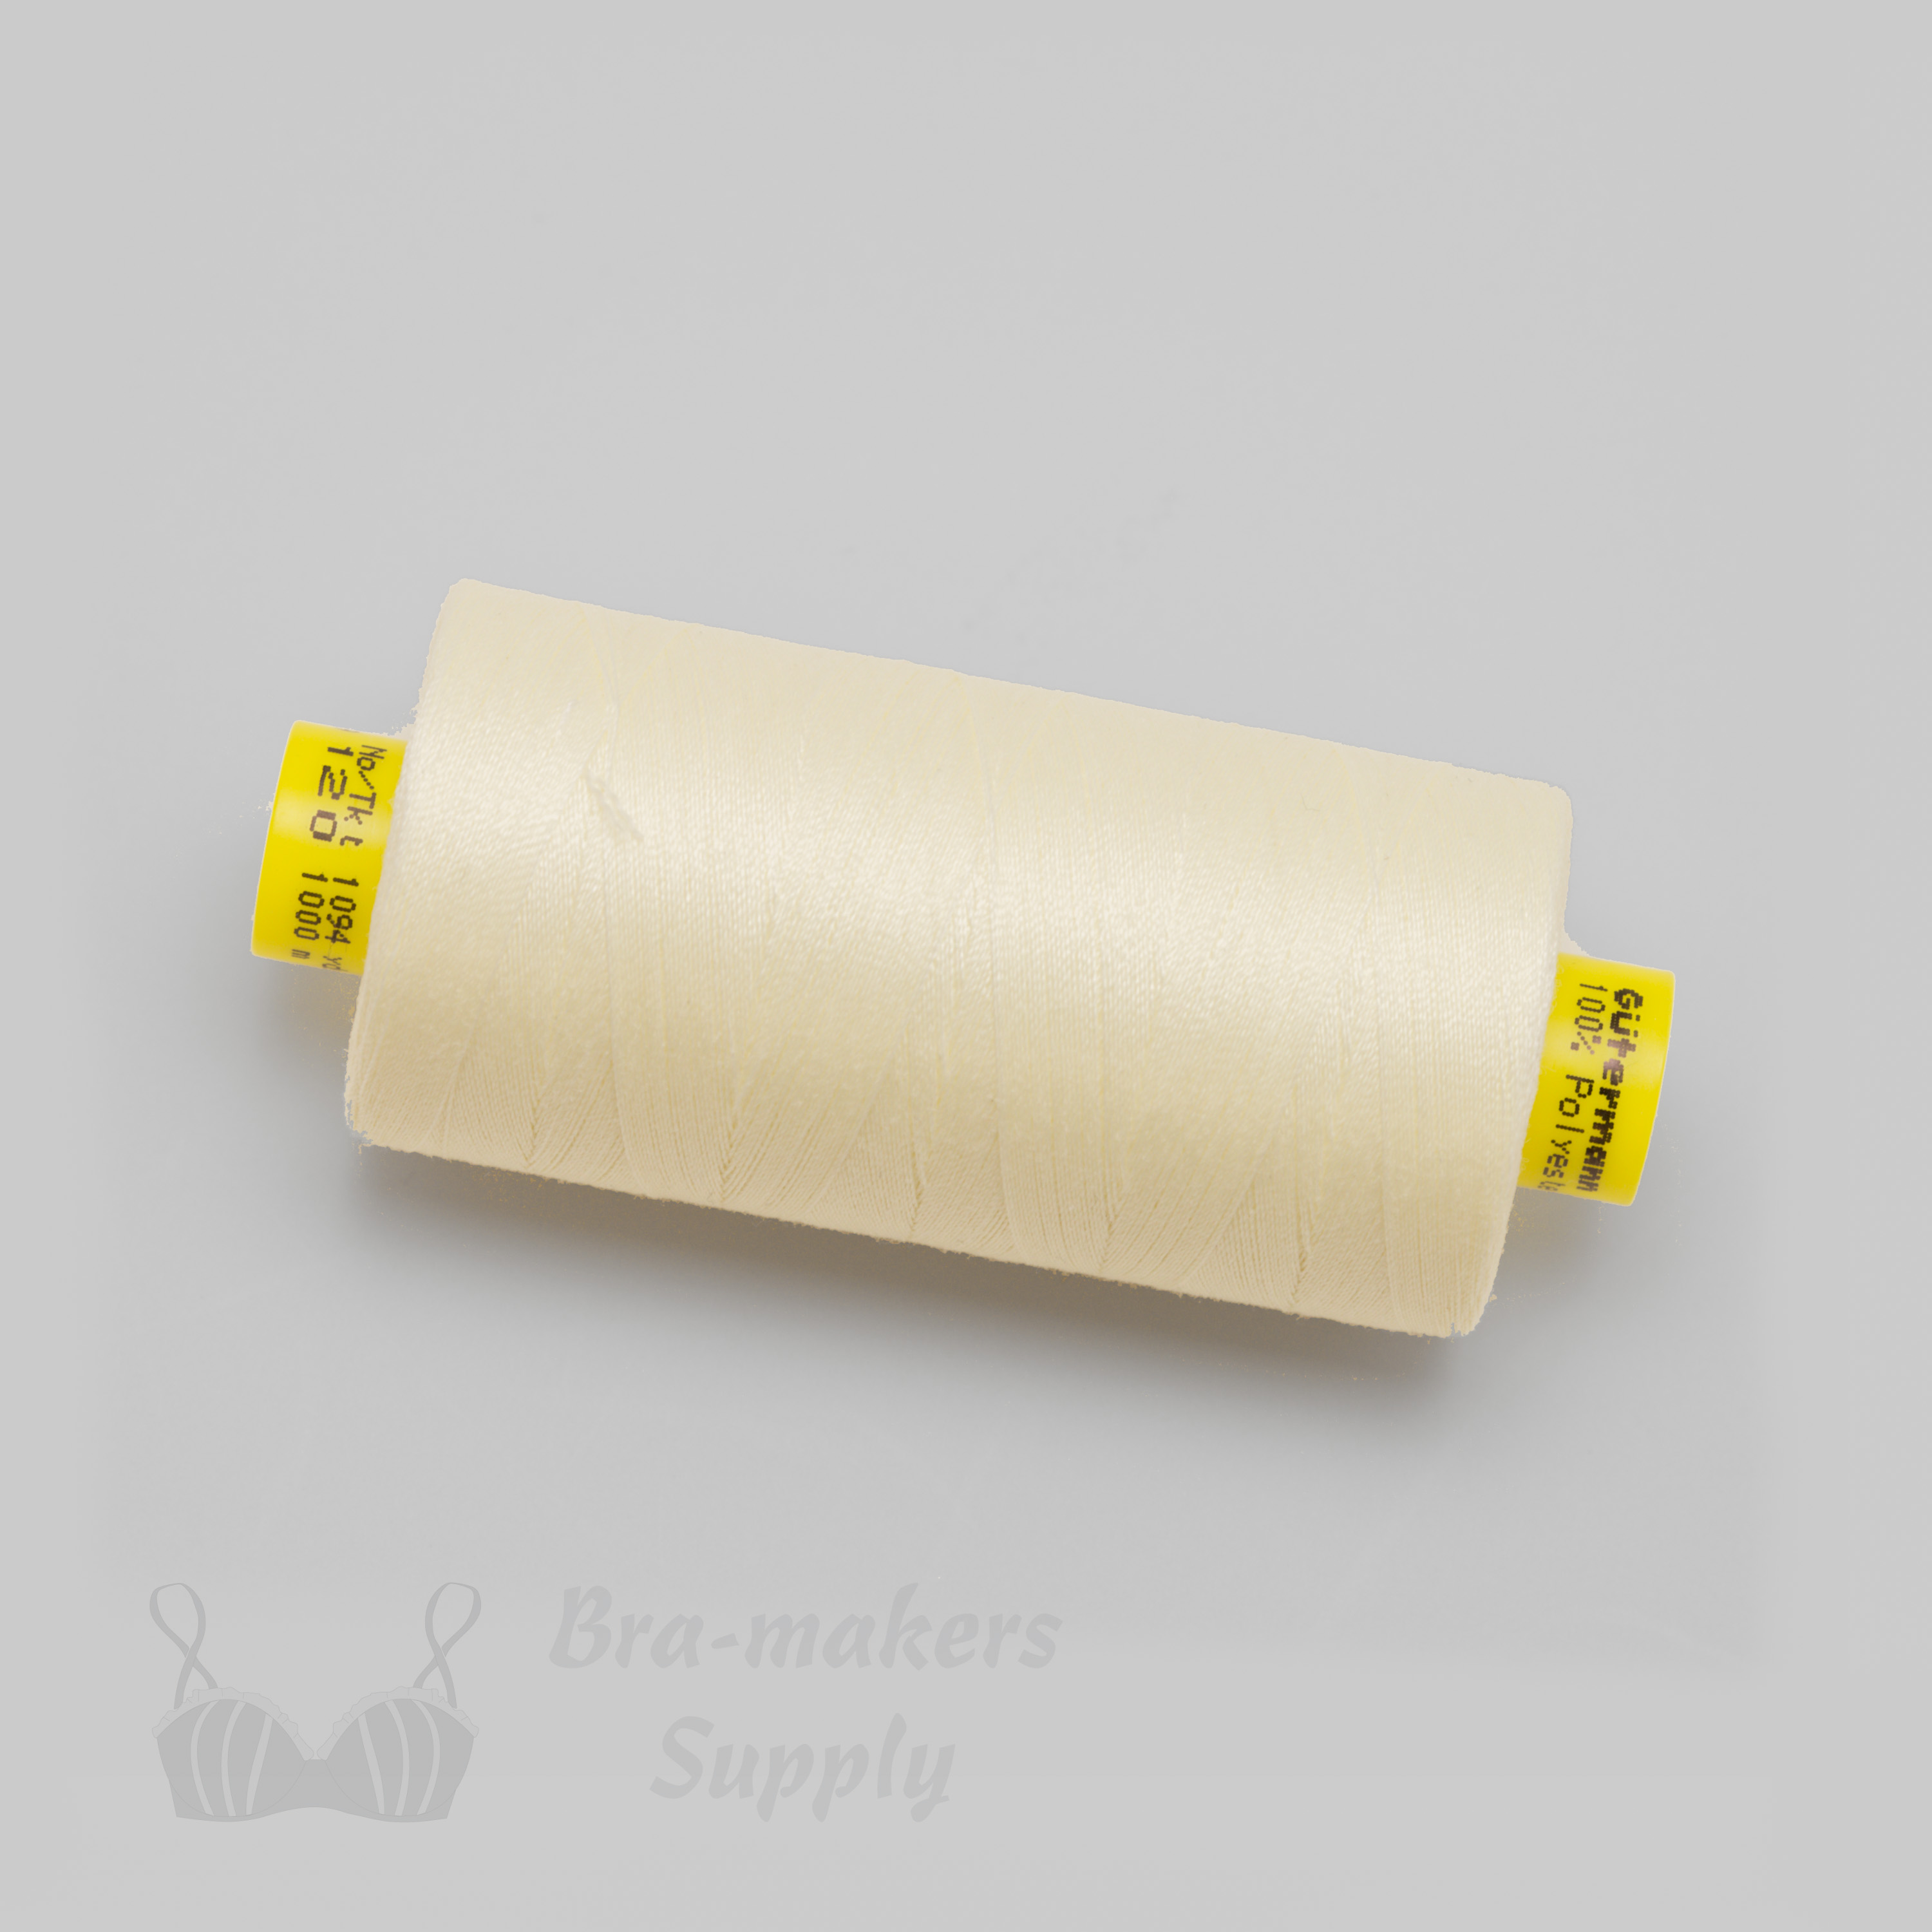 gutermann mara 120 industry quality polyester thread TG-10 ivory or Pantone 11-0507 winter white from Bra-Makers Supply 1 spool shown